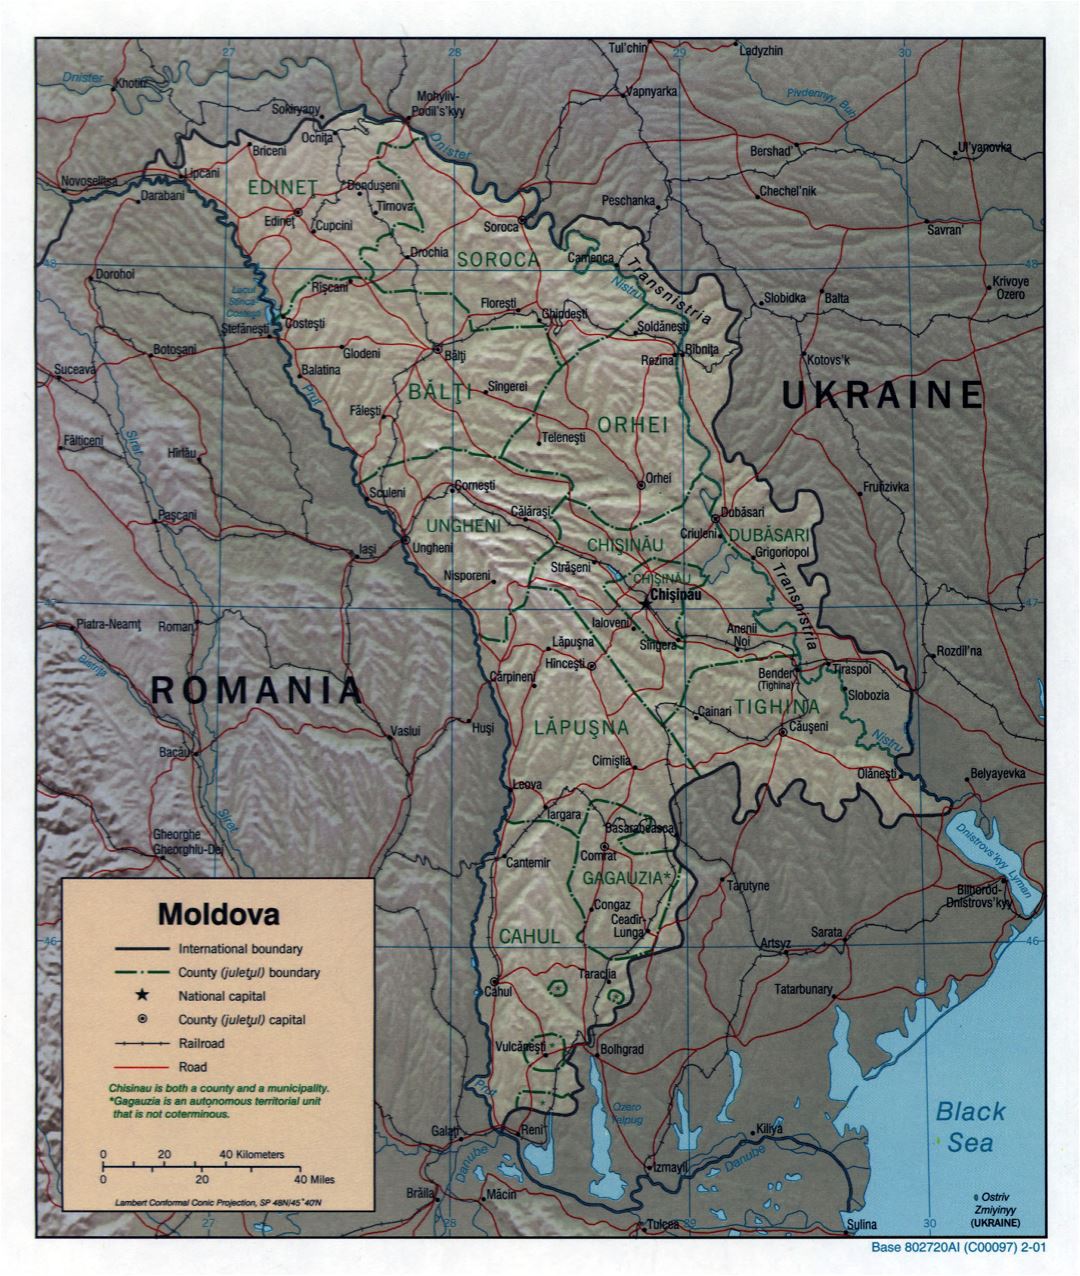 Large scale political and administrative map of Moldova with relief, roads, railroads and major cities - 2001